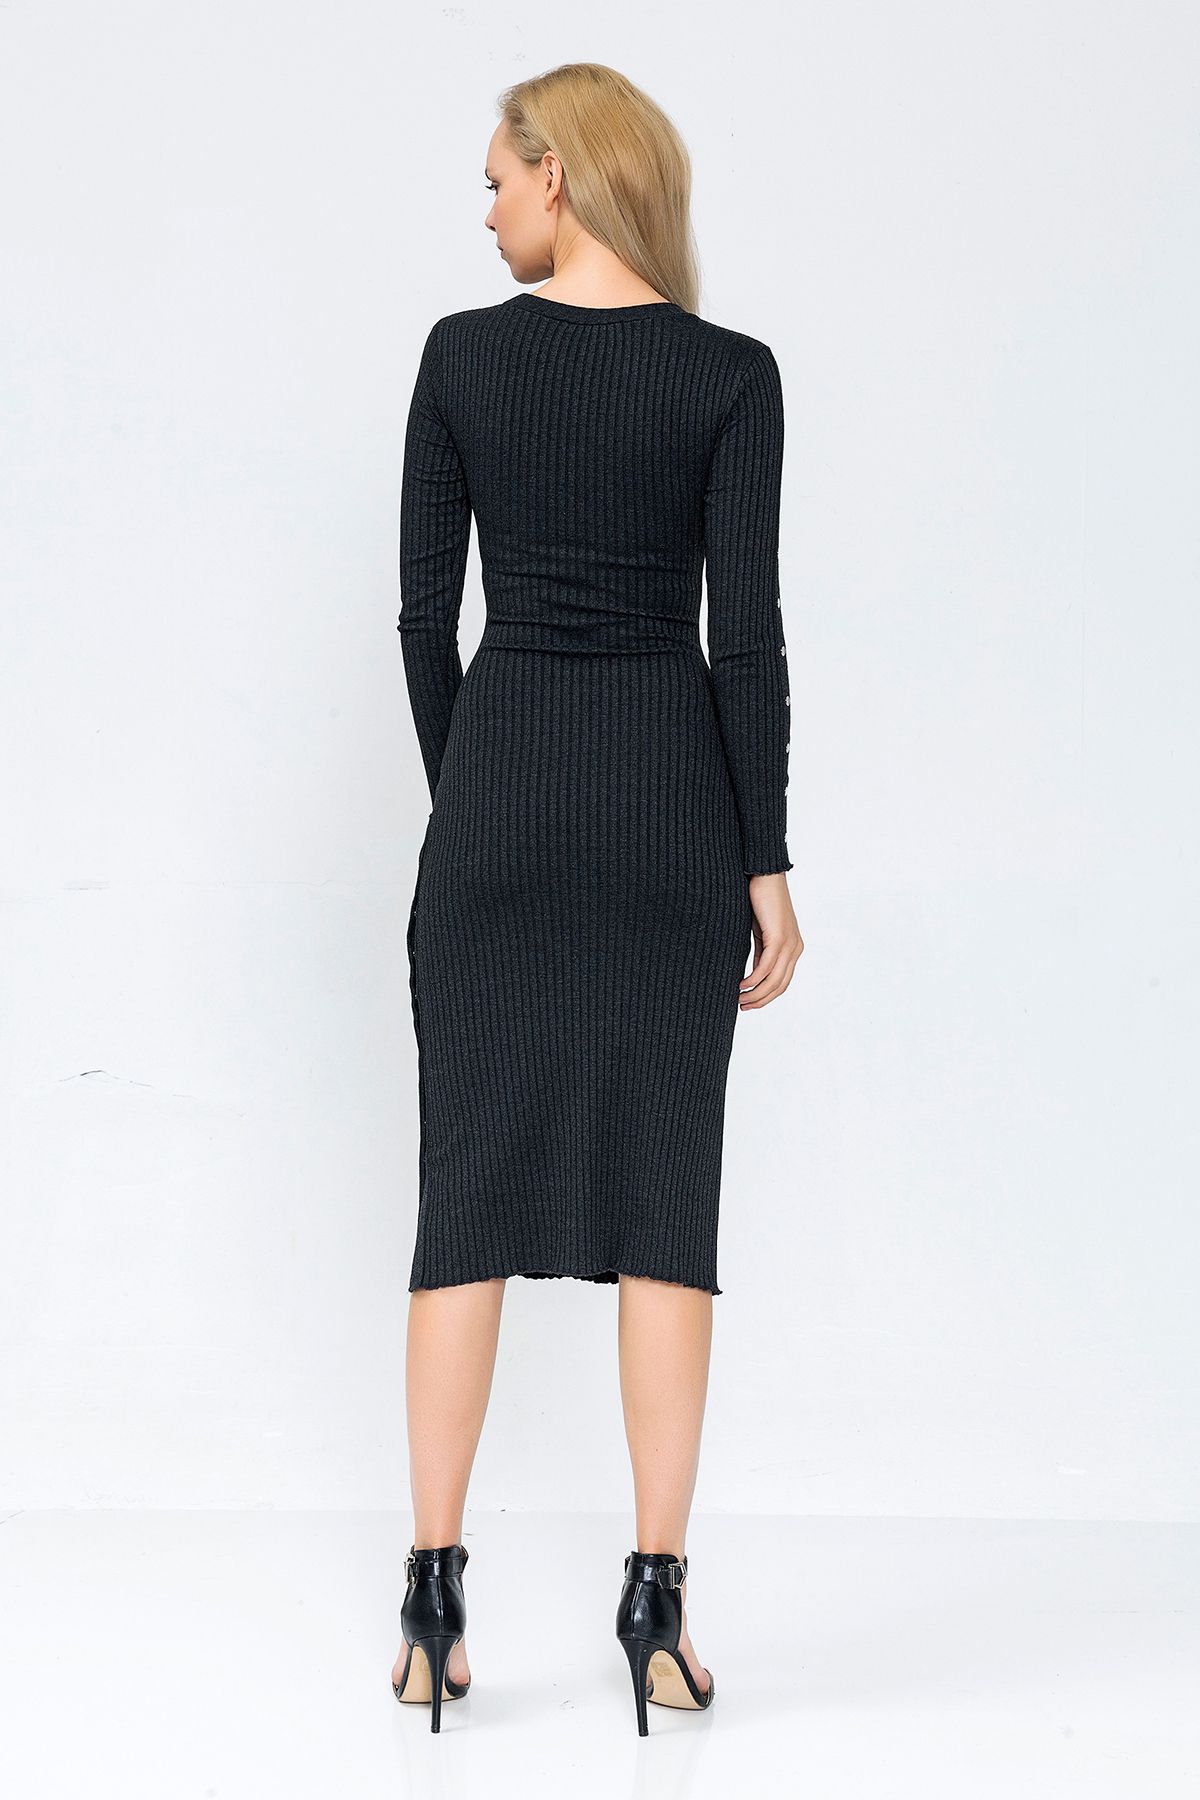 Picture of the sides Snap Knitwear Dress